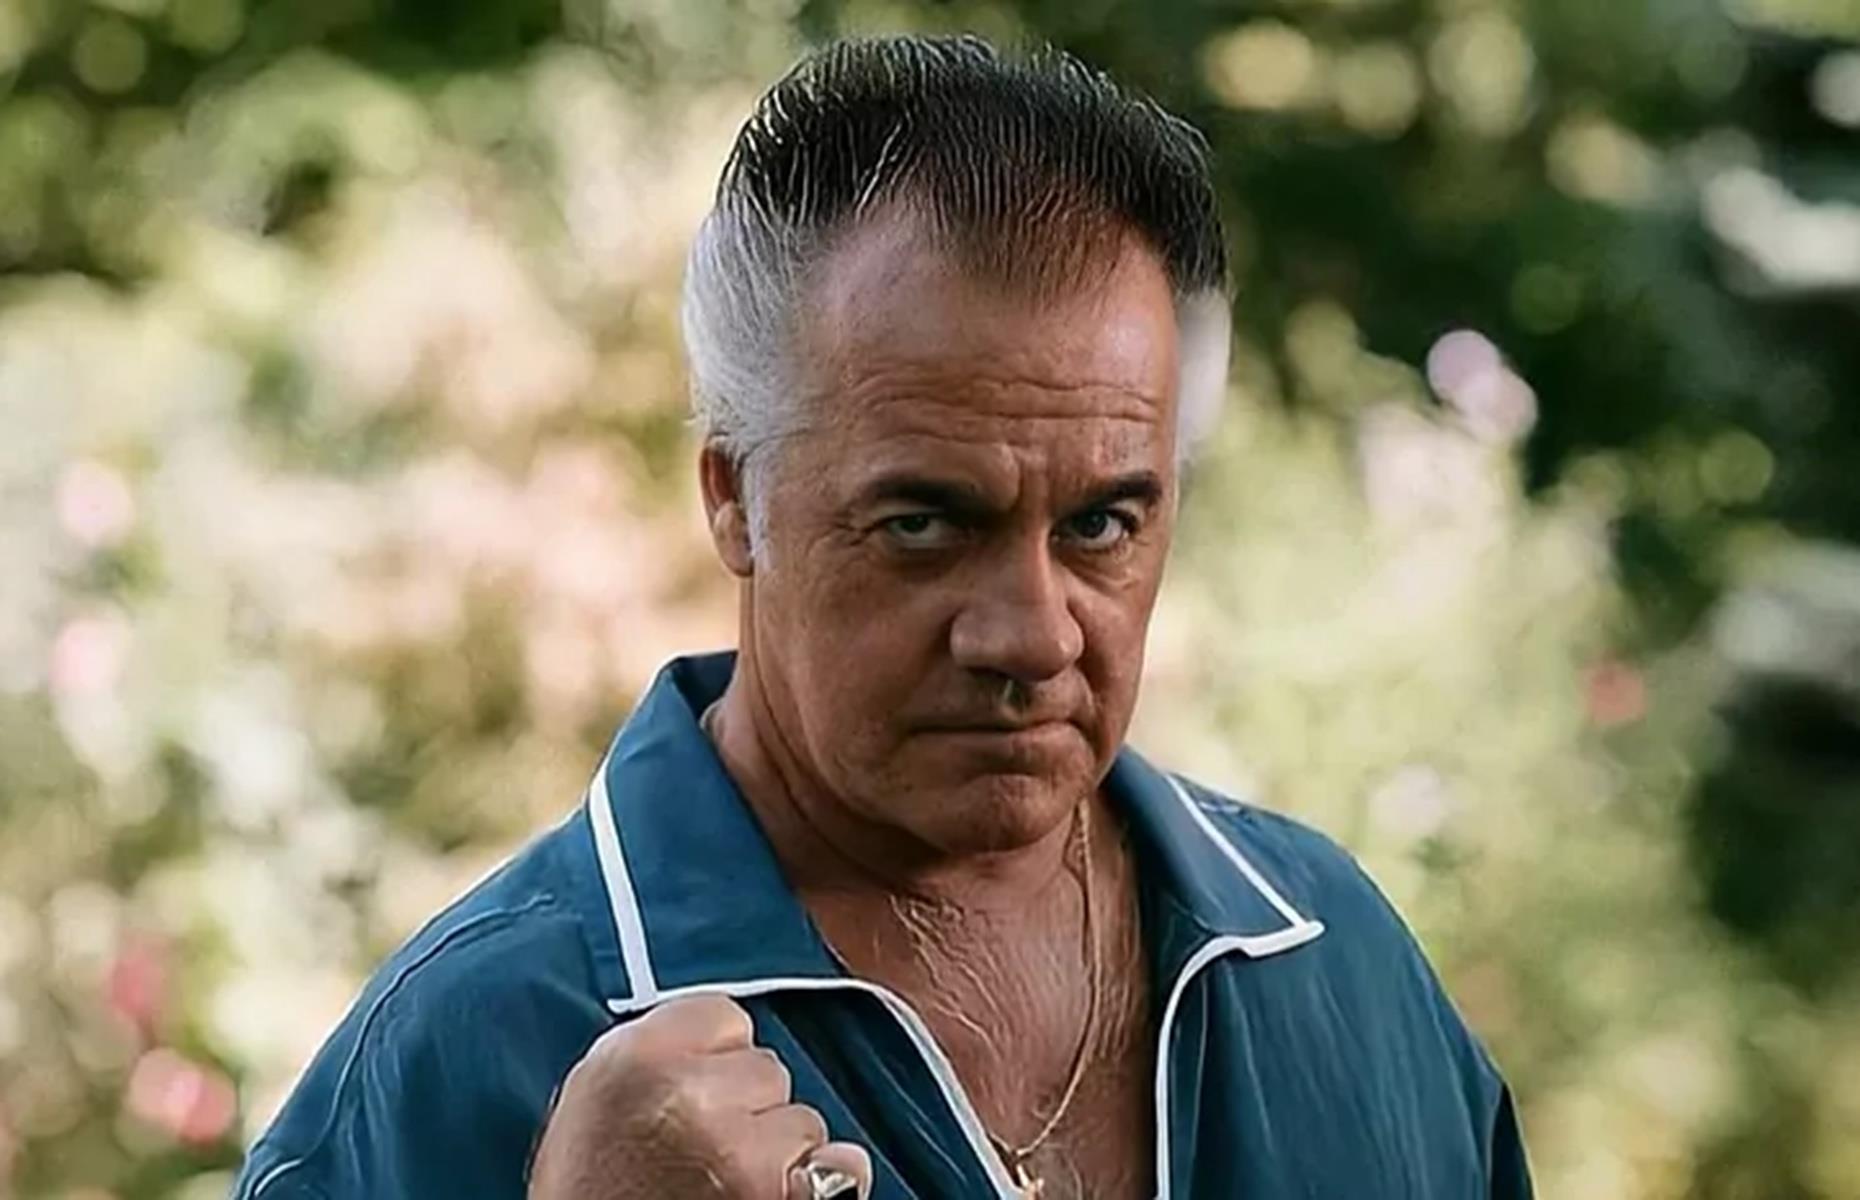 <p>The late Tony Sirico played DiMeo crime family member Paulie Gualtieri, a major character throughout all six seasons of the show.</p>  <p>Sirico made his acting debut as an extra in the 1974 film <em>Crazy Joe.</em></p>  <p>Other notable projects prior to joining <em>The Sopranos</em> cast included the crime epic <em>GoodFellas </em>and the TV series <em>Miami Vice.</em></p>